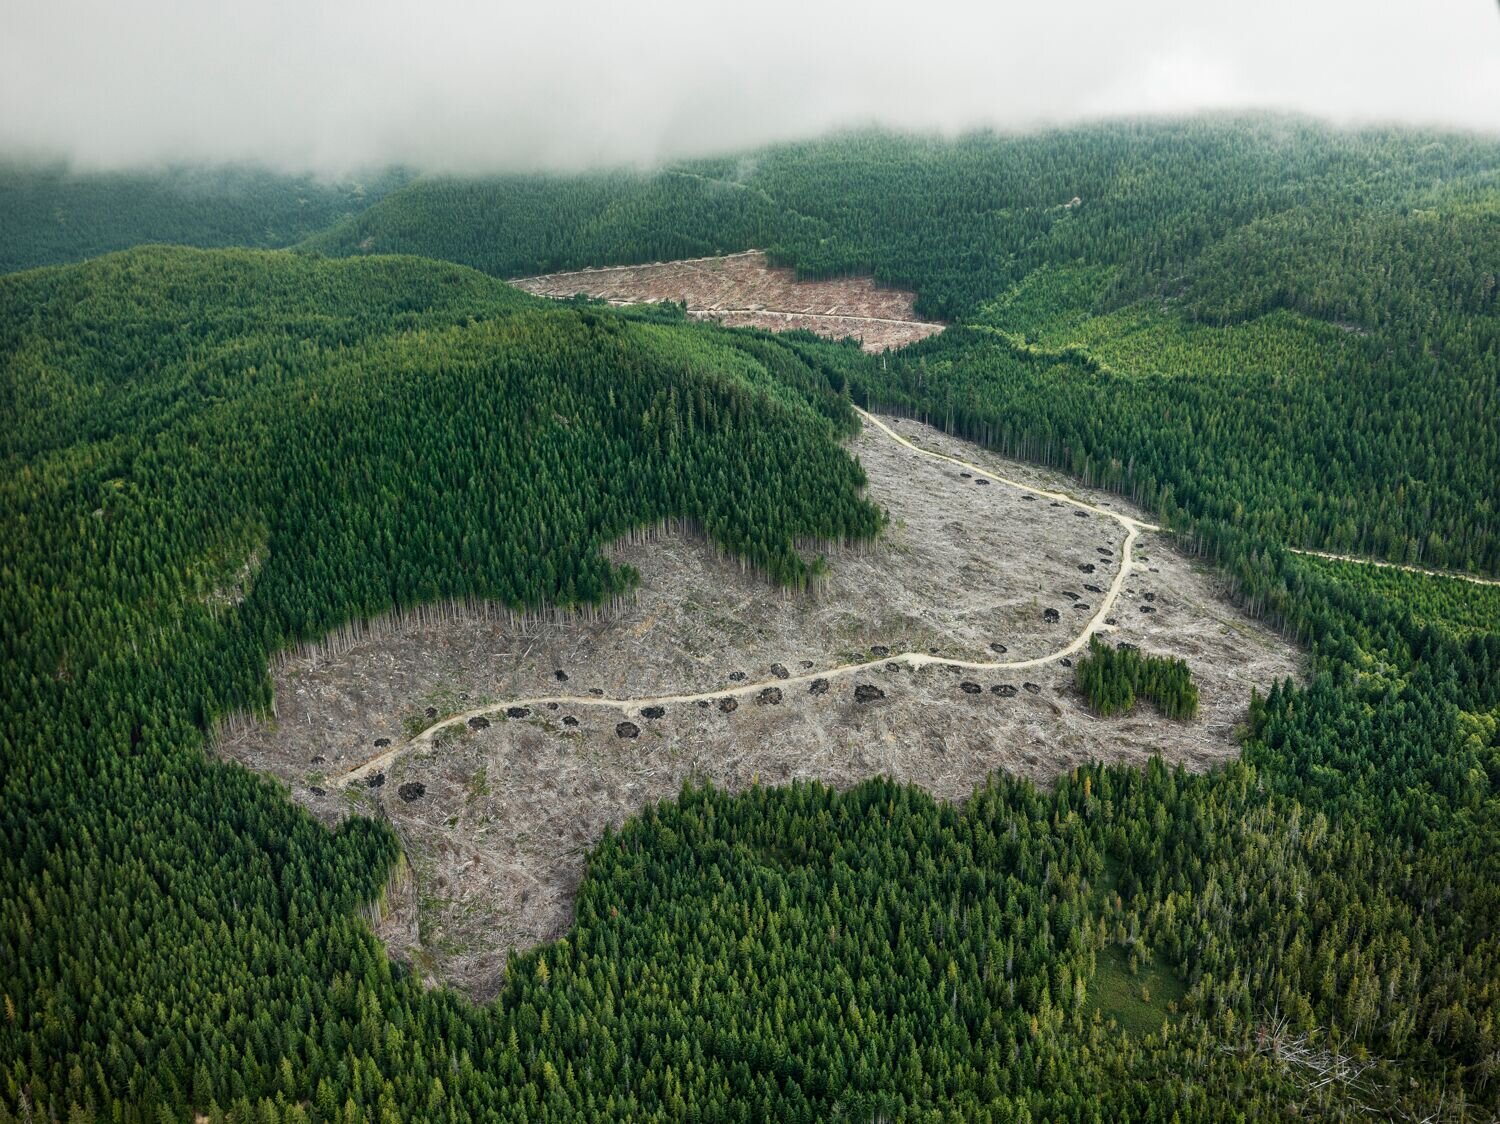  Clearcut #4, Vancouver Island, British Columbia, Canada, 2016 Signed on verso Pigment inkjet print on Kodak Professional photo paper 39 x 52 inches Edition of 9 